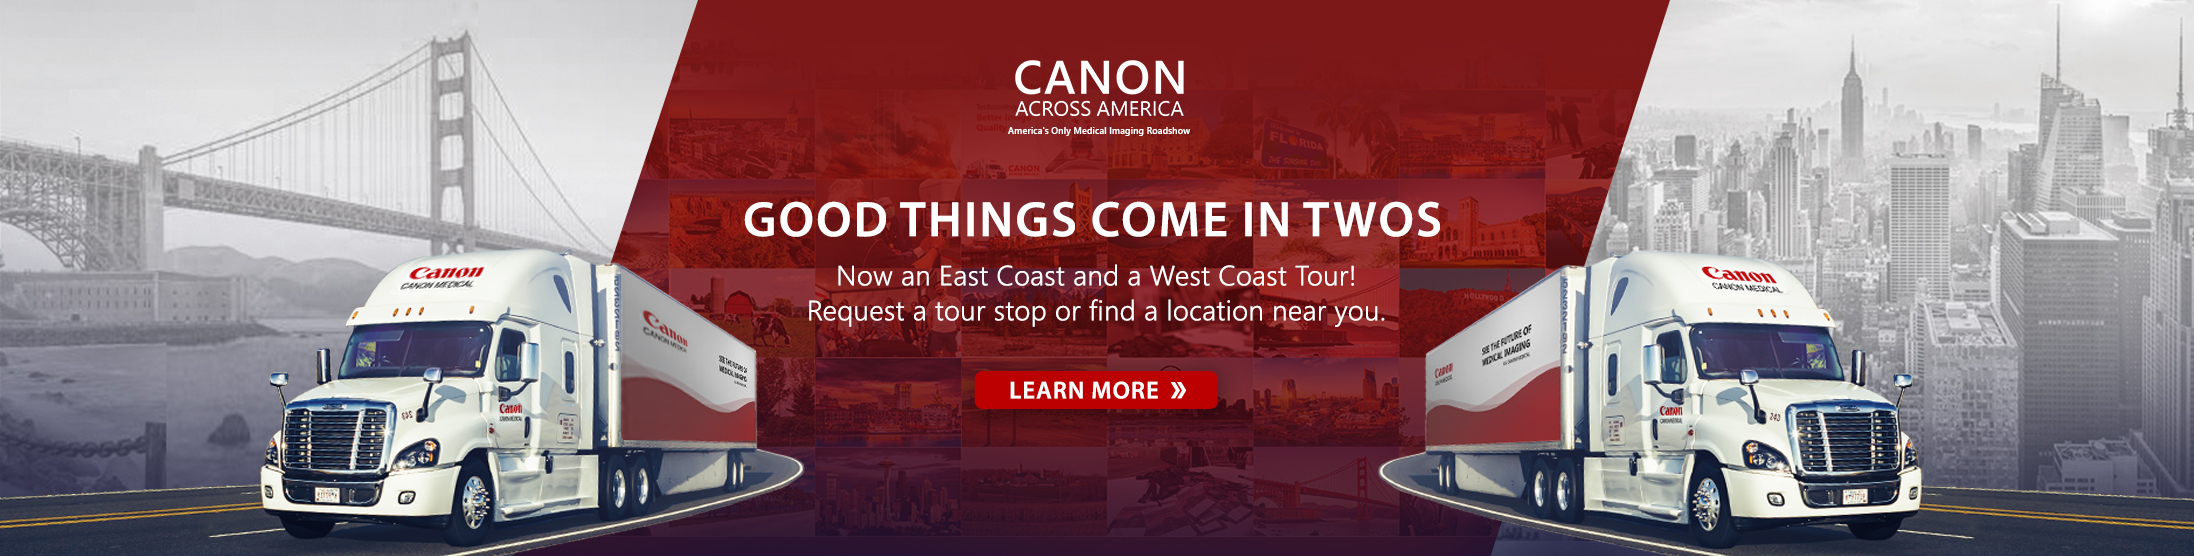 Canon Across America: Good Things Come in Twos | Now an East Coast and a West Coast Tour! Request a tour stop or find a location near you. | Learn More